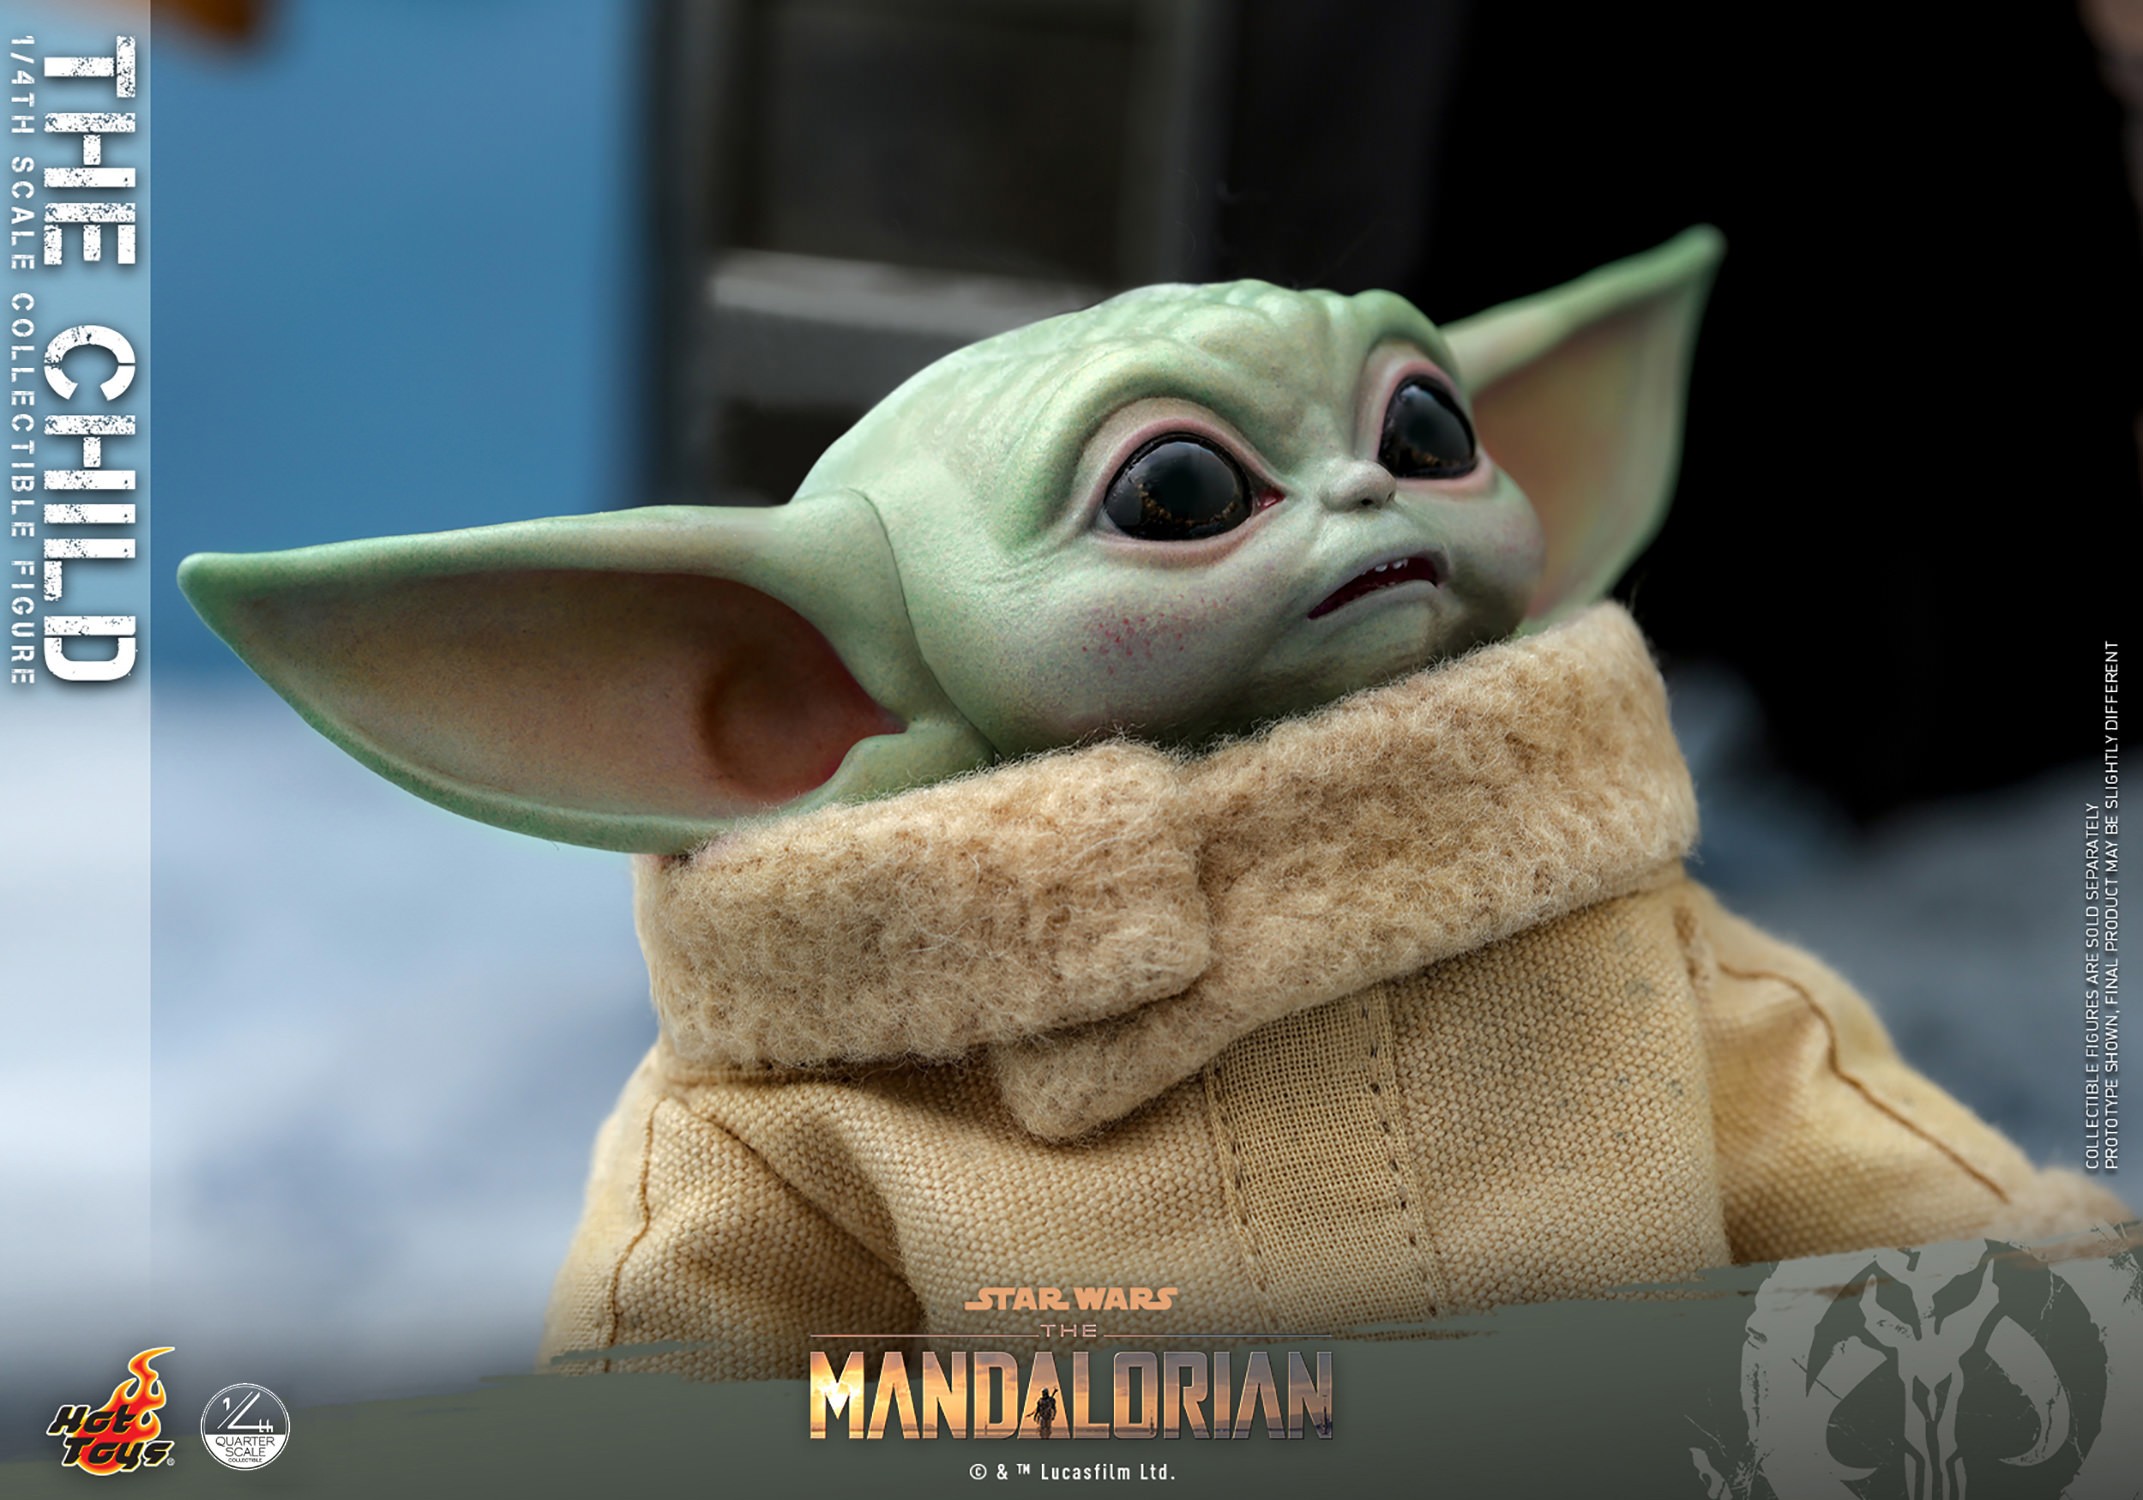 Here Are The 5 Best Official Baby Yoda 'Mandalorian' Toys You Can